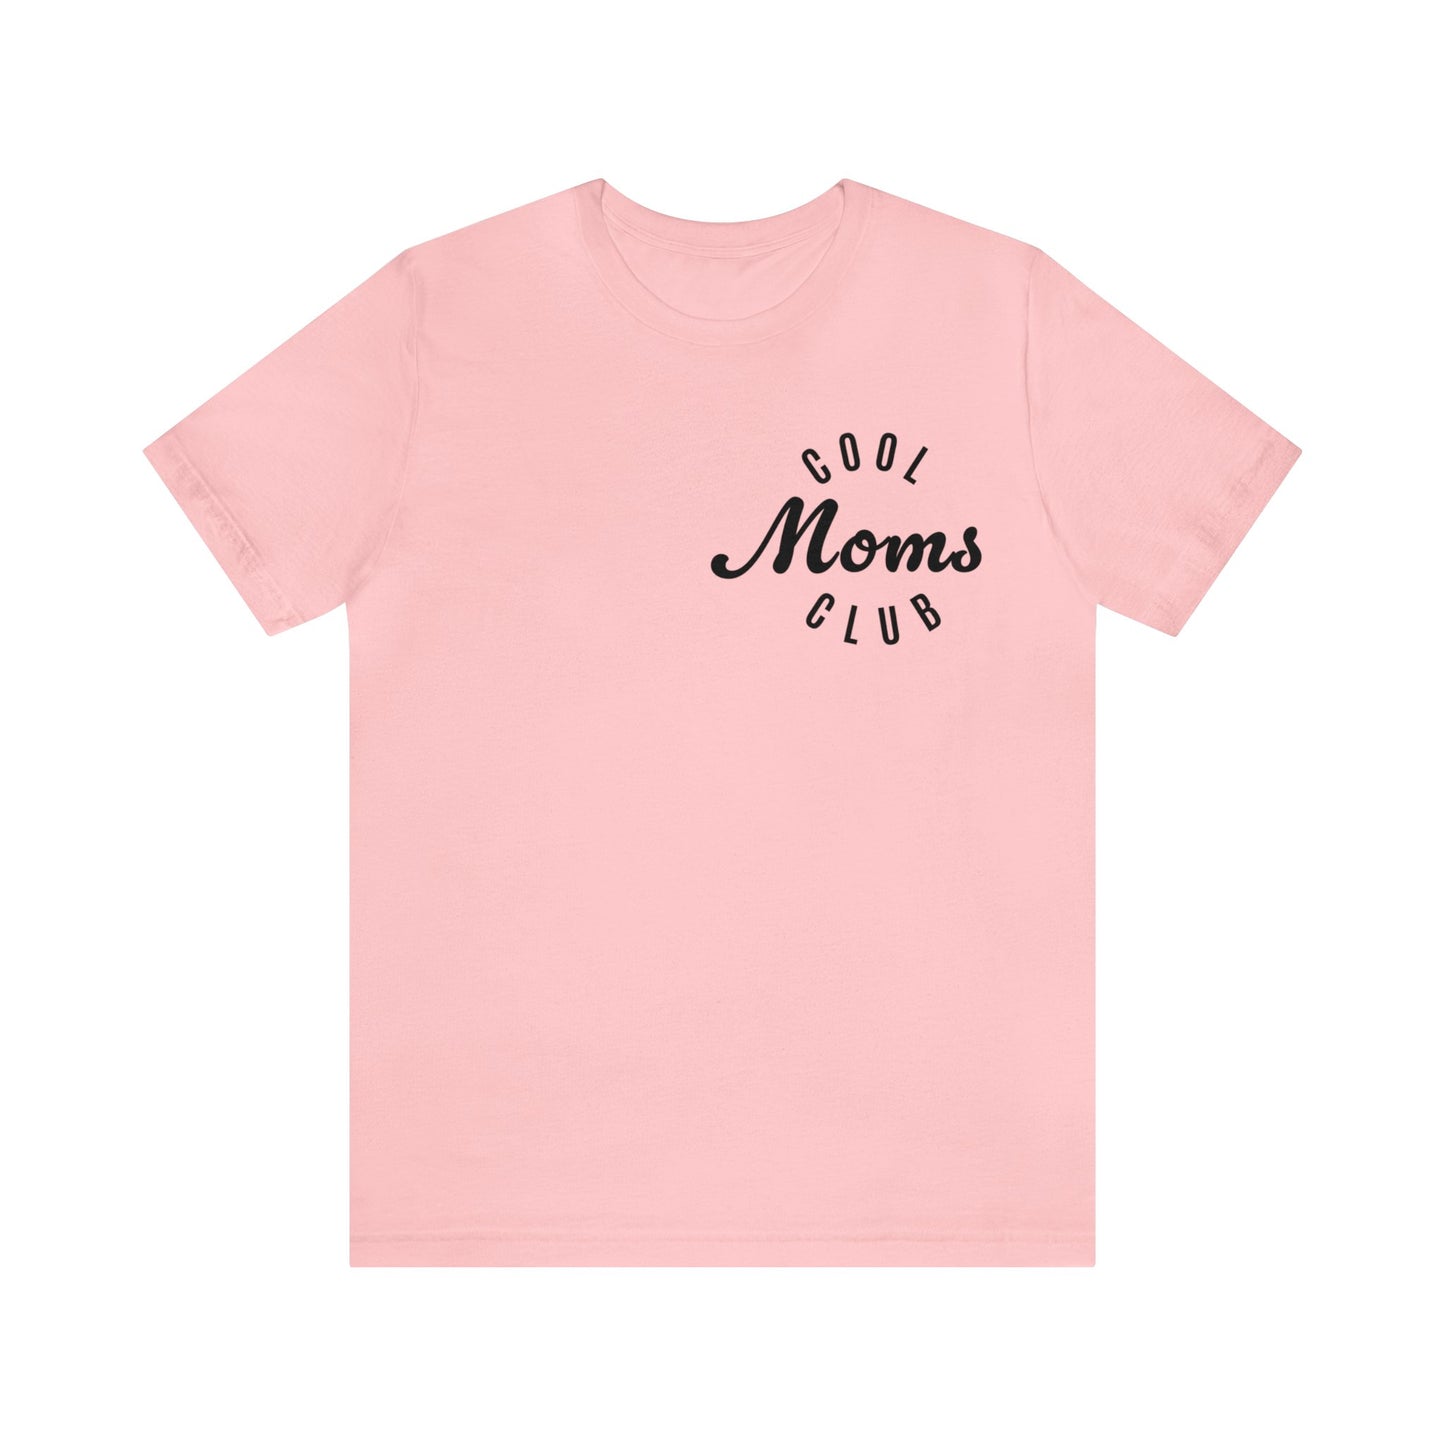 Cool Moms Club Shirt, Funny Gift for Mom to Be, Cool Mom Shirt for Mom, Cool Mom Shirt for New Mom, Gifts For New Mom, T1173